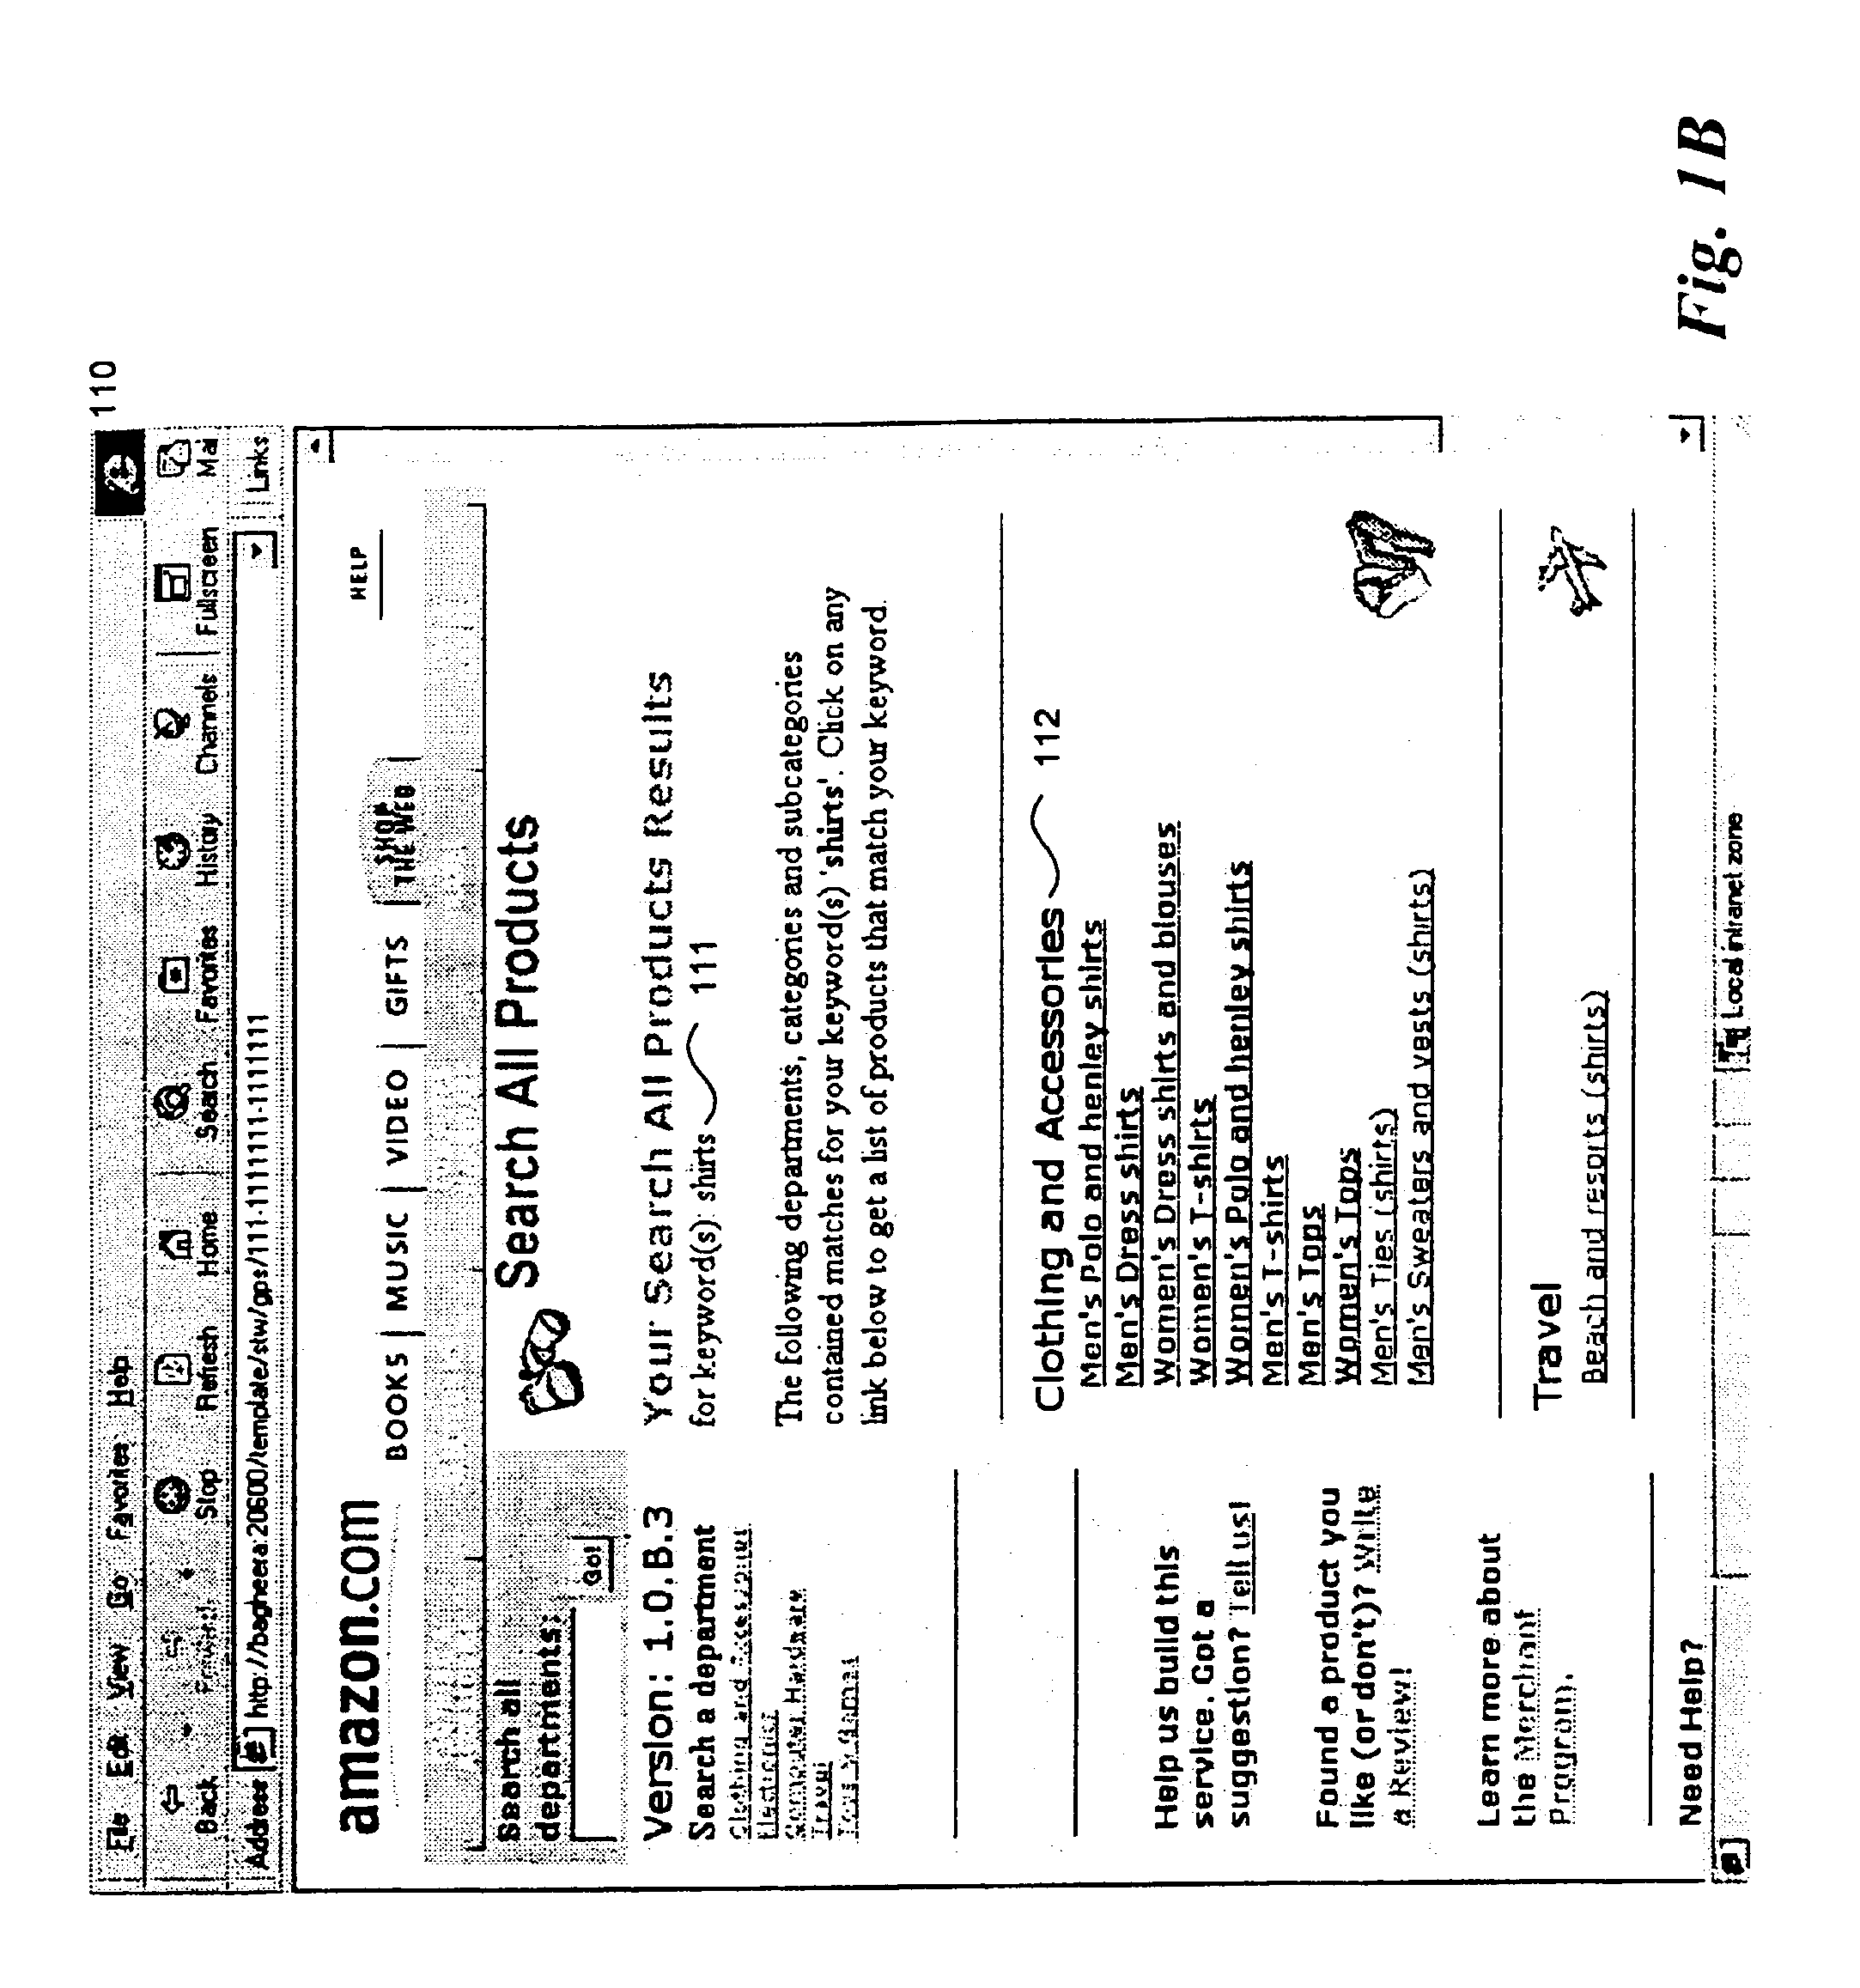 Method and system for generation of hierarchical search results